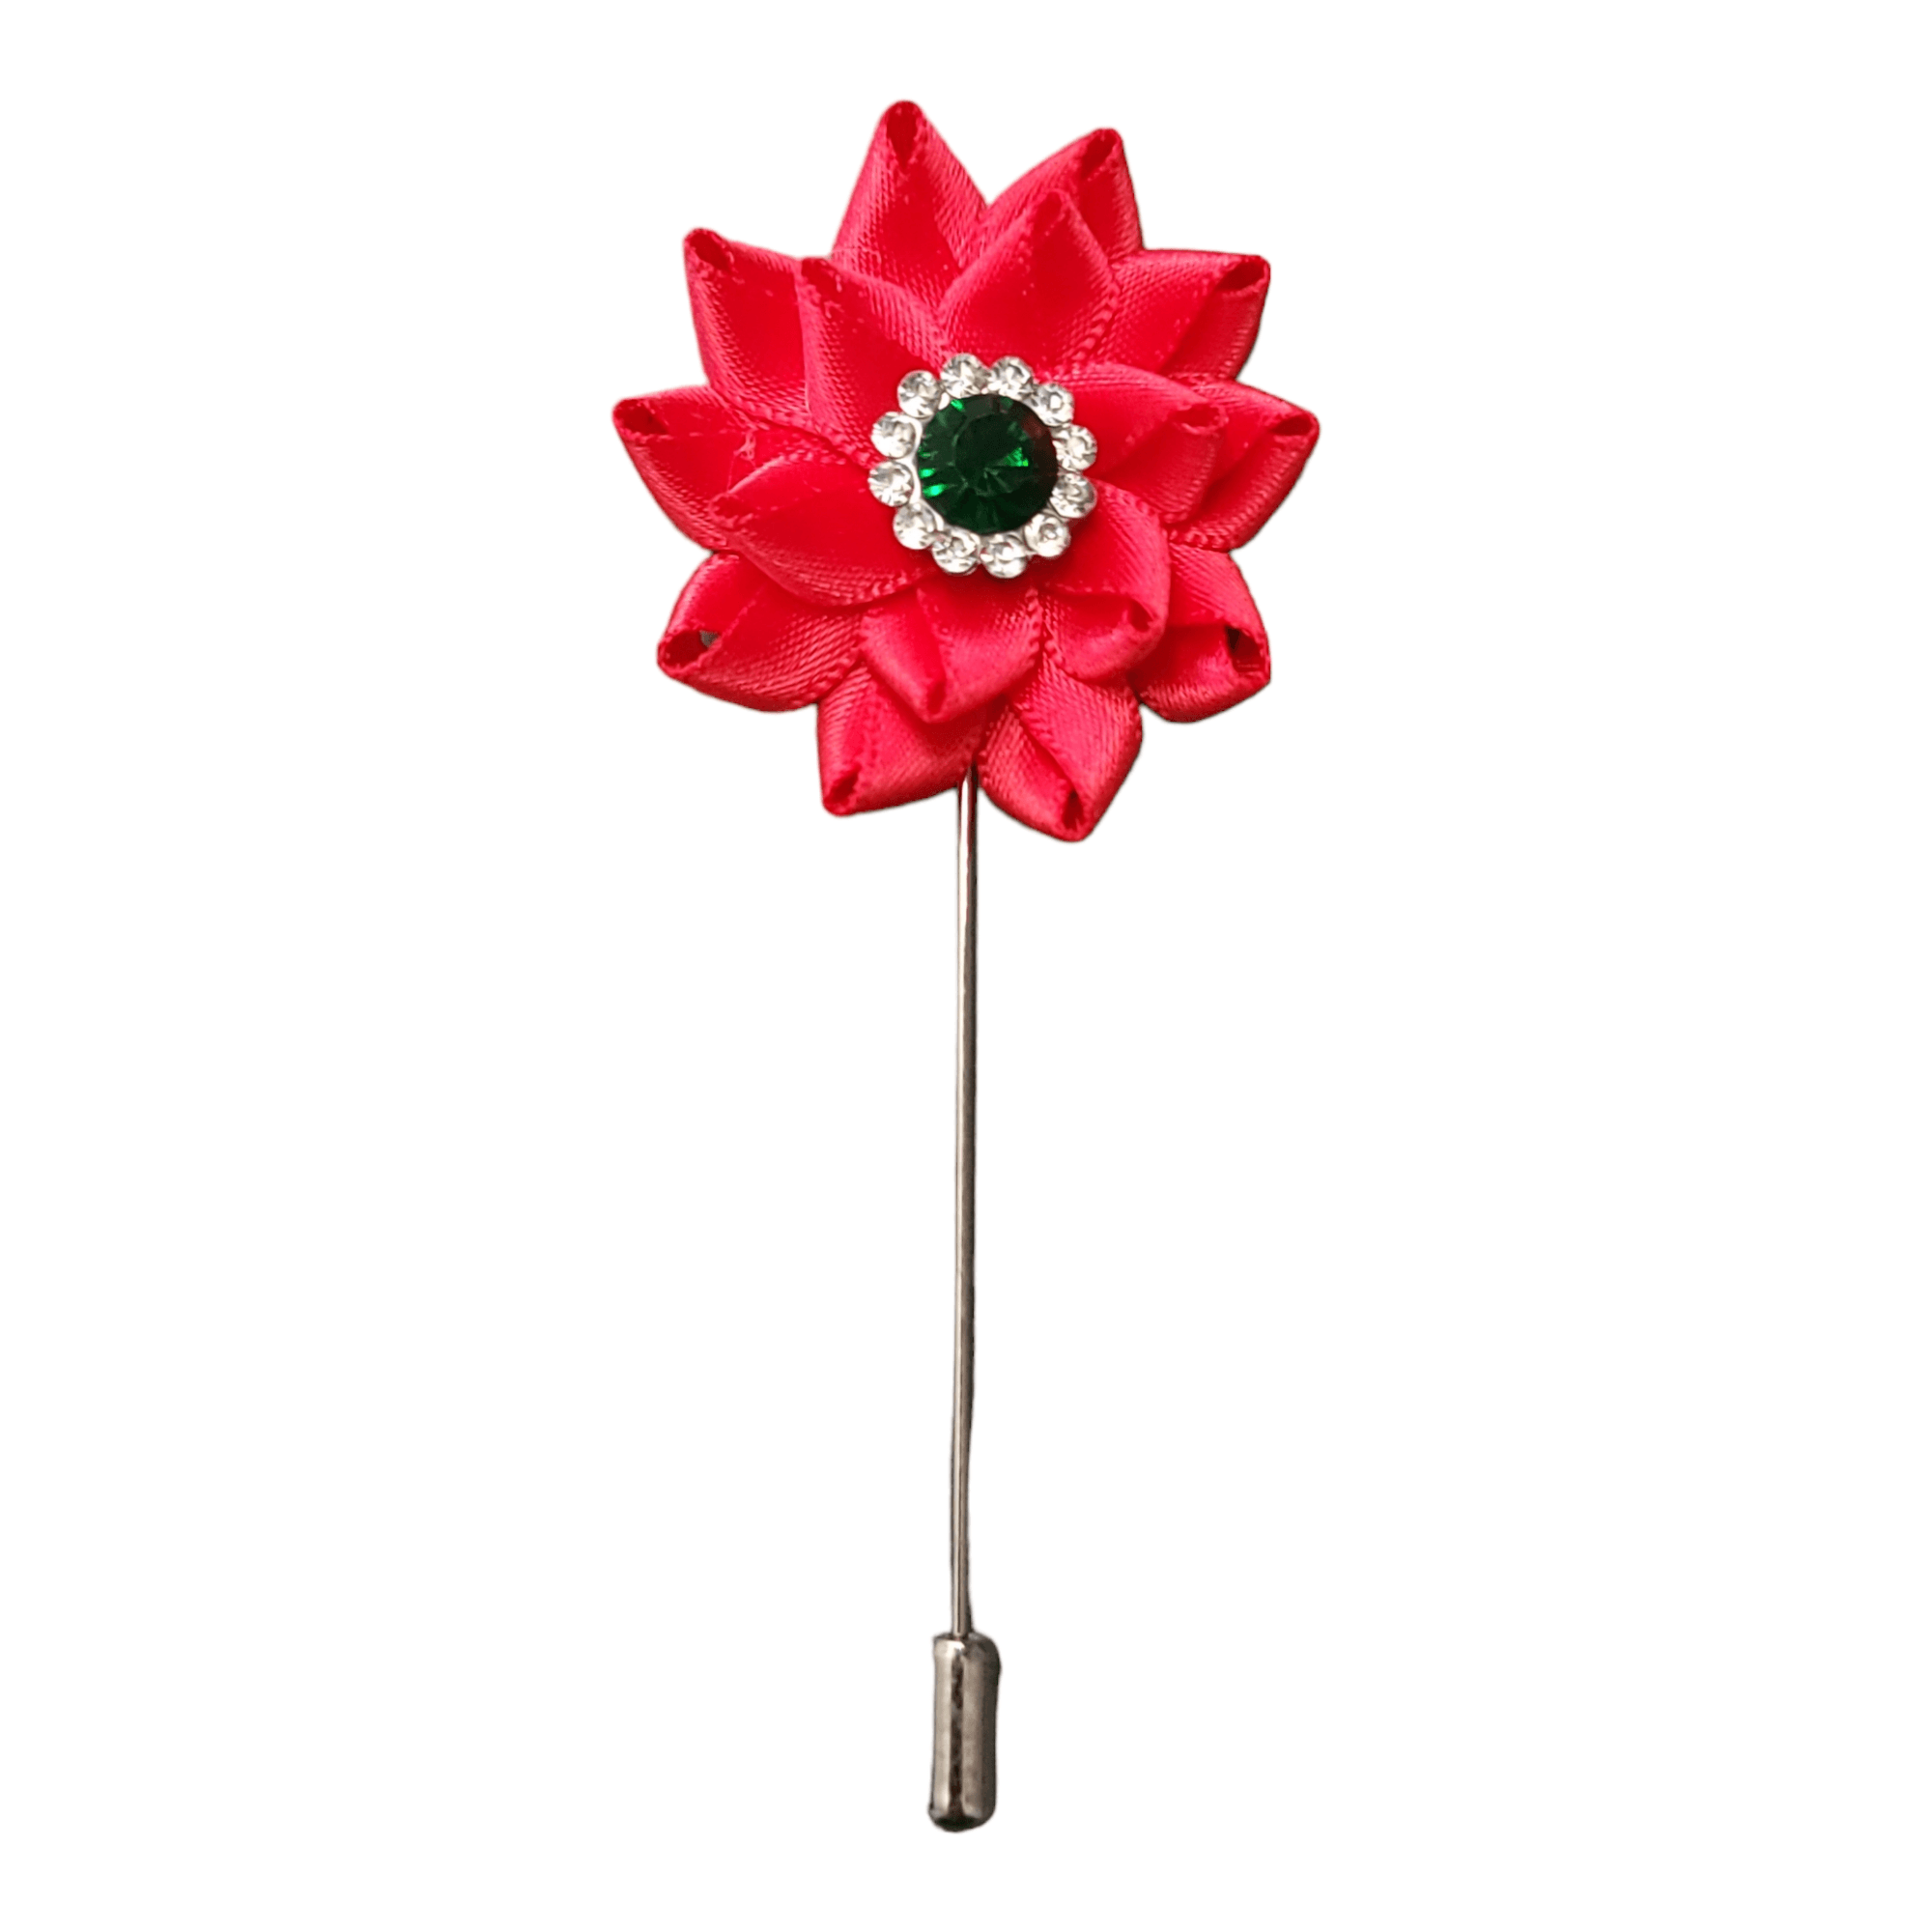 Flower Luxurious Lapel Pin Rose Red - STYLETIE